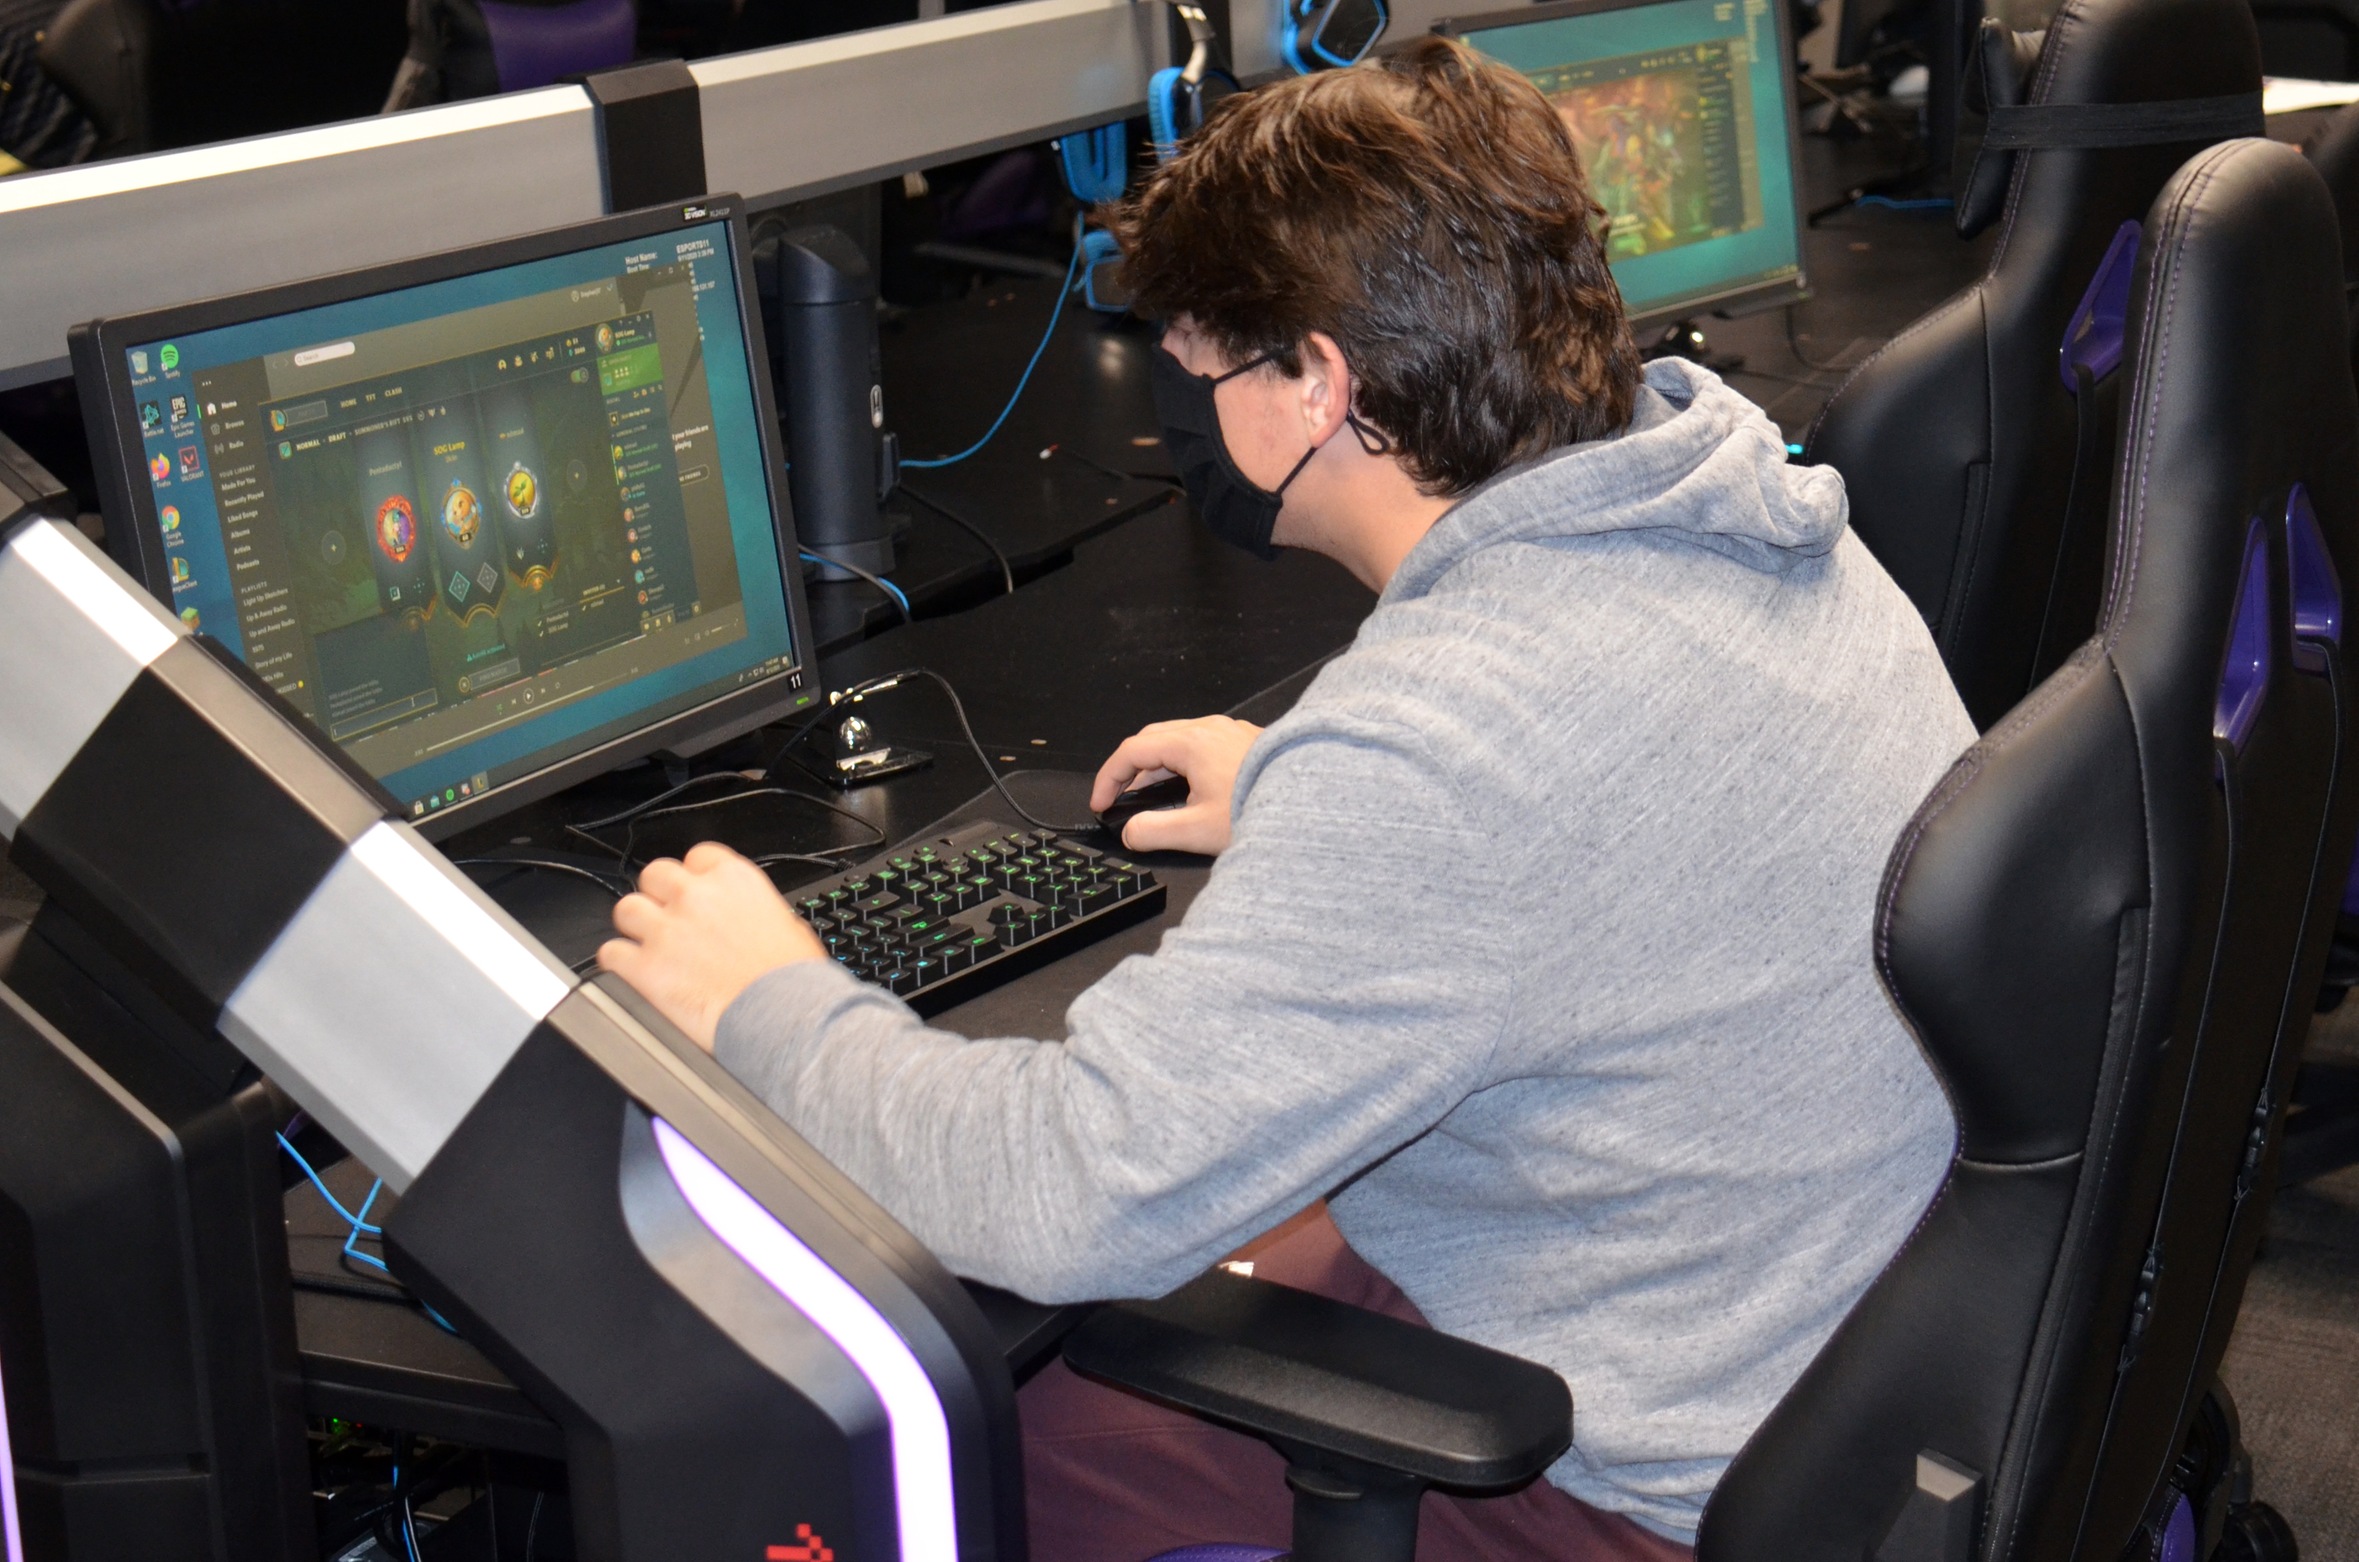 Esports concludes regular season with League of Legends loss to Trine